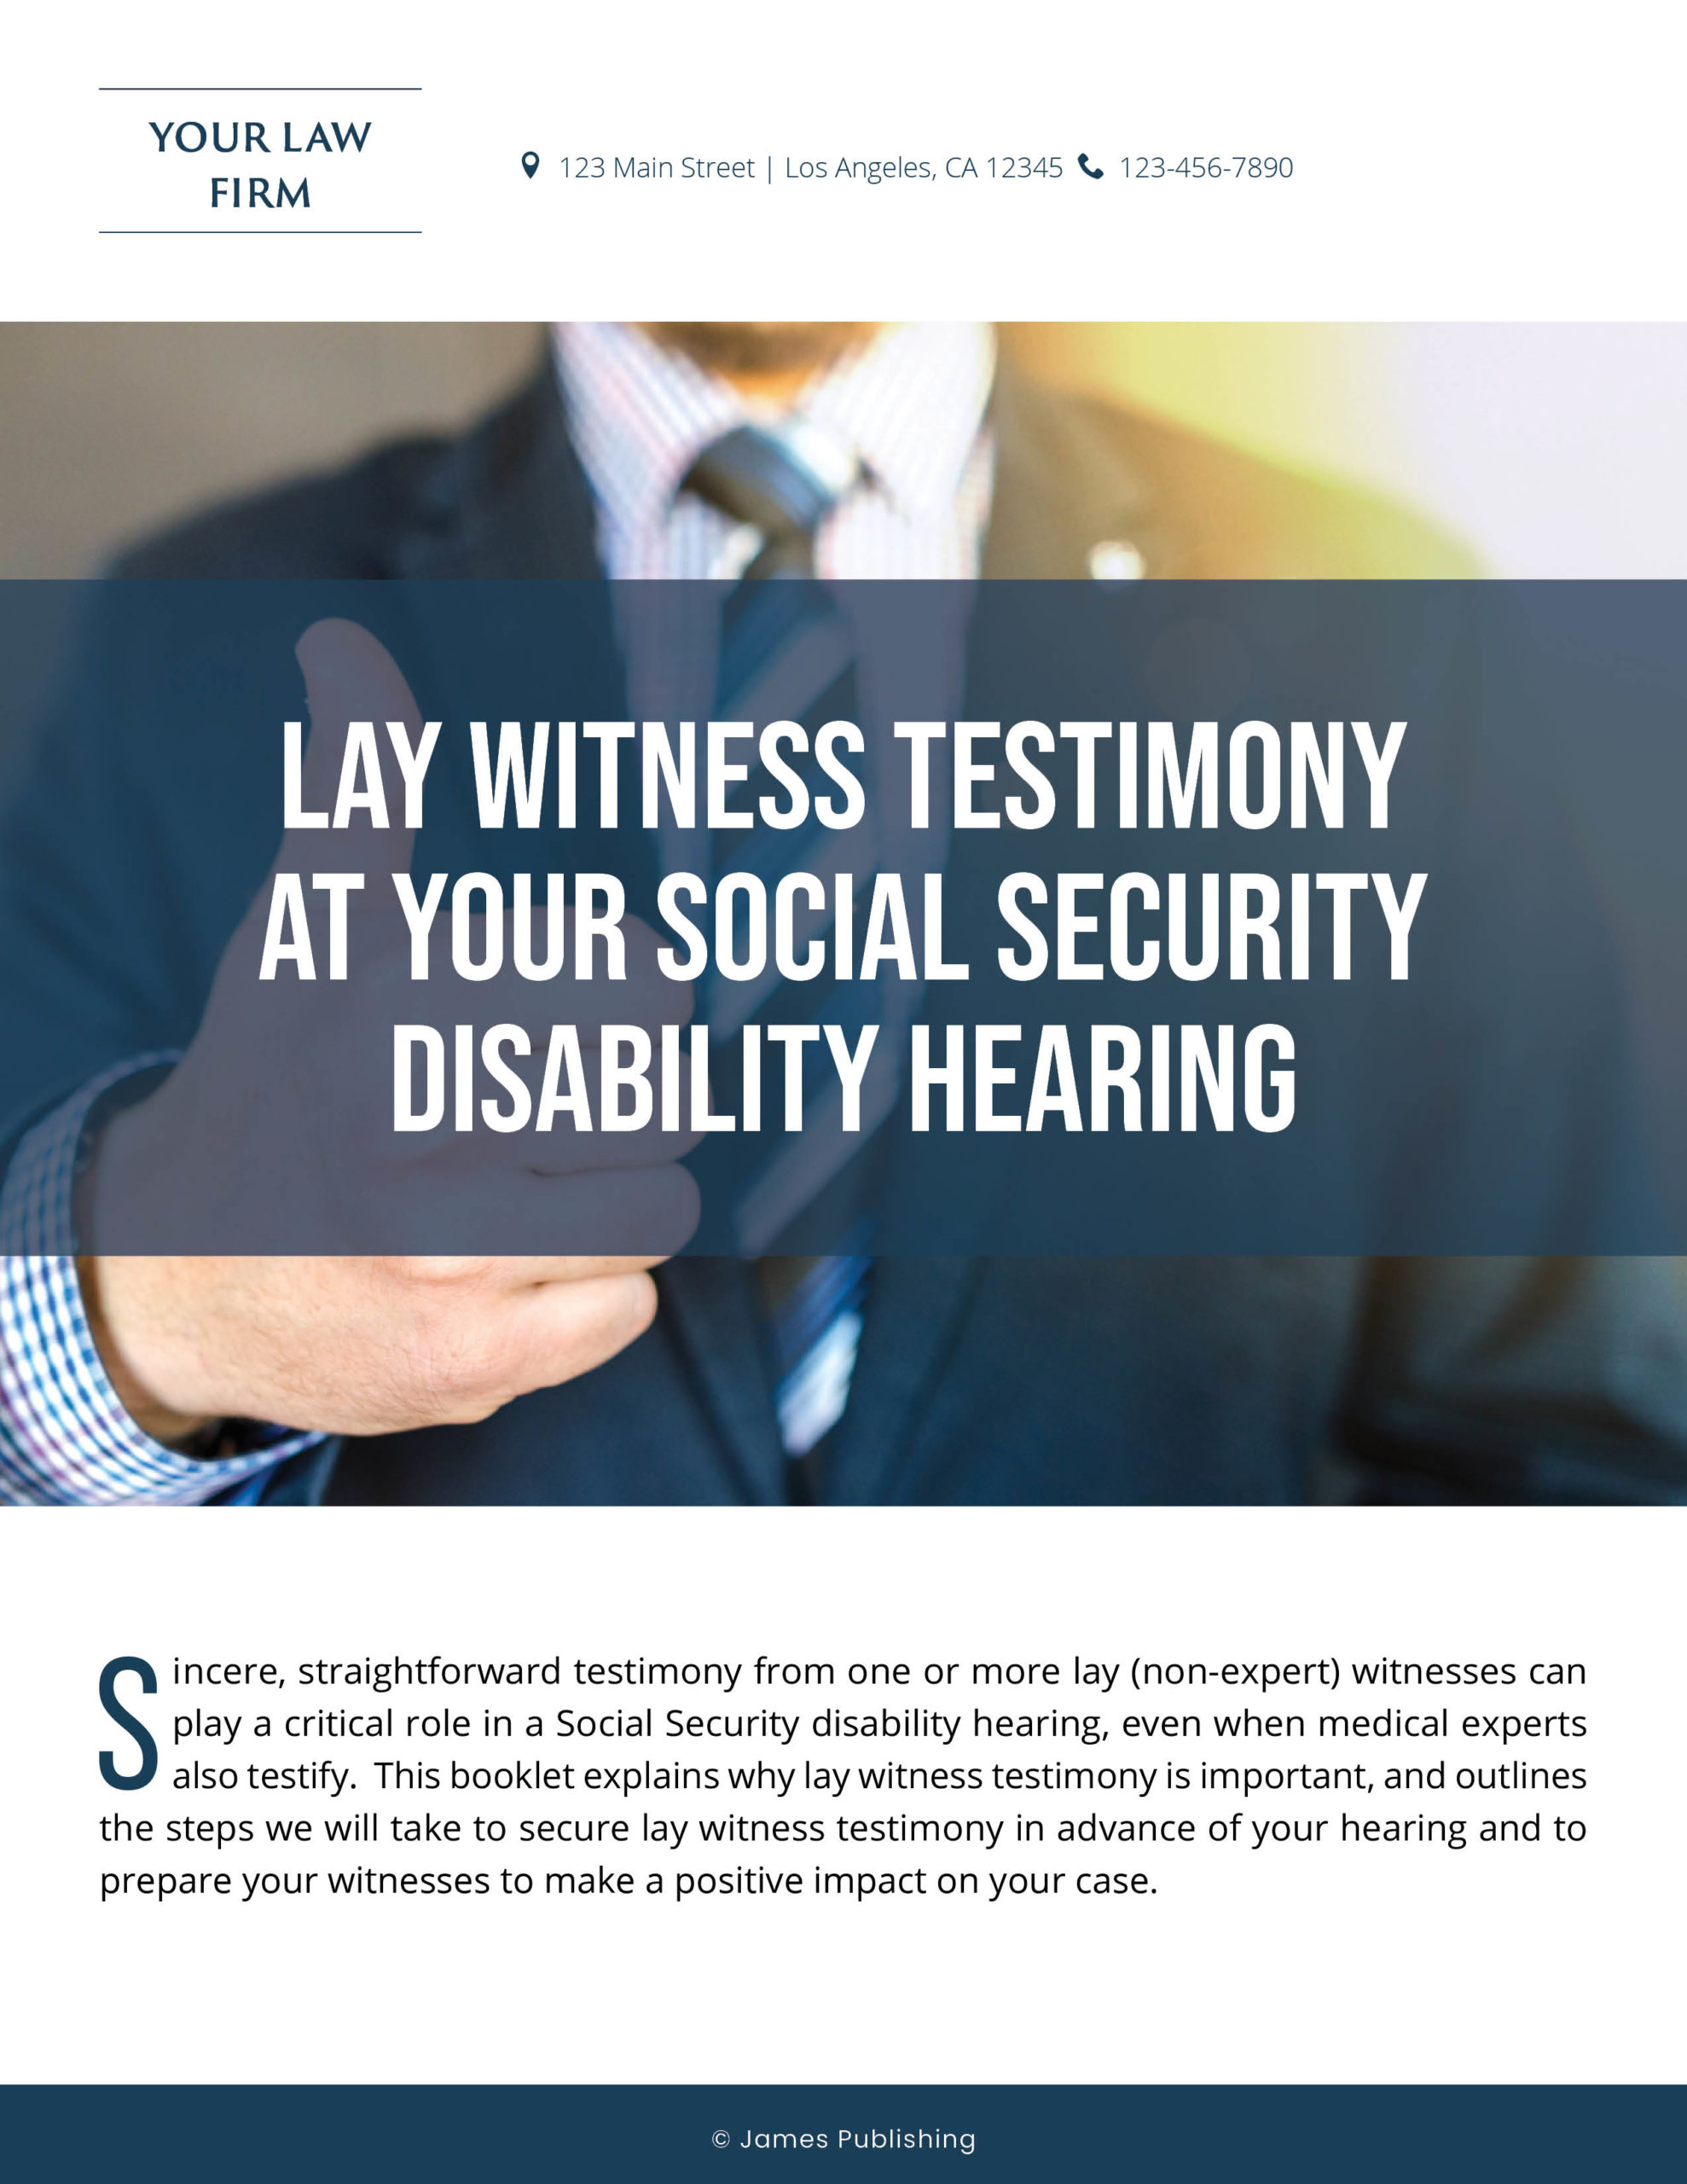 SSD-11 Lay Witness Testimony at Your Social Security Disability Hearing